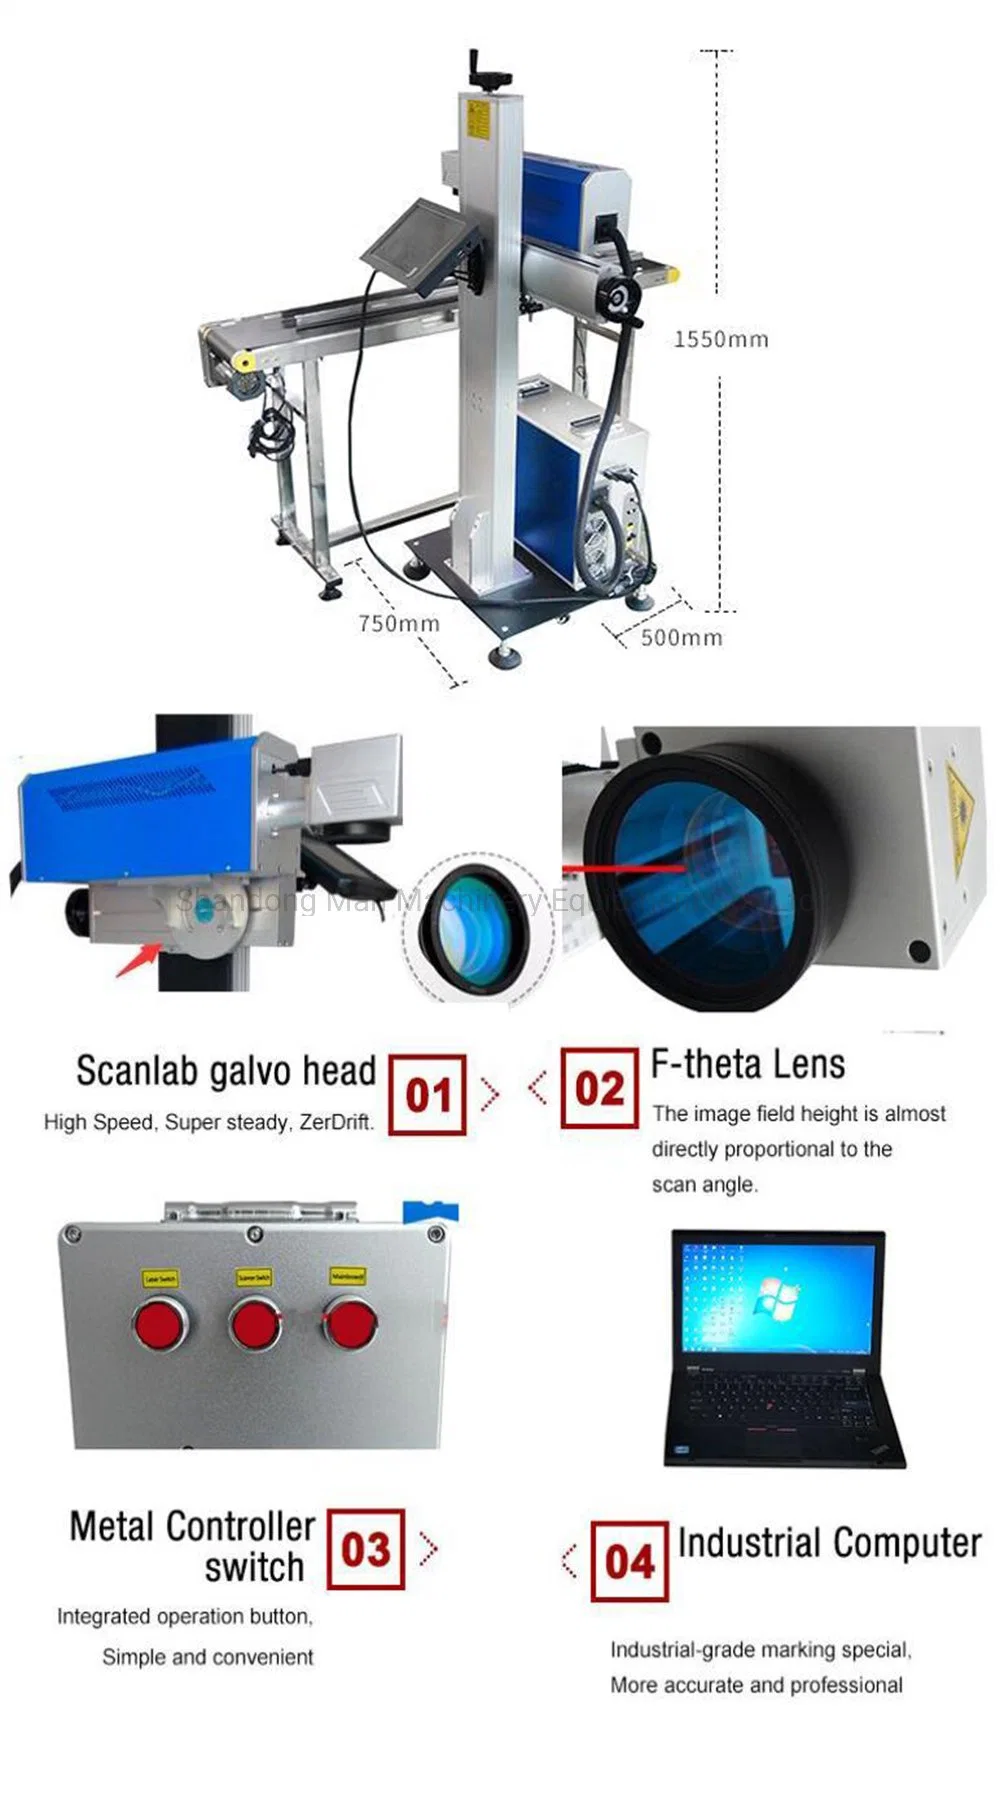 CO2 Fly Laser Marking Machine for Cable with Conveyor Belt